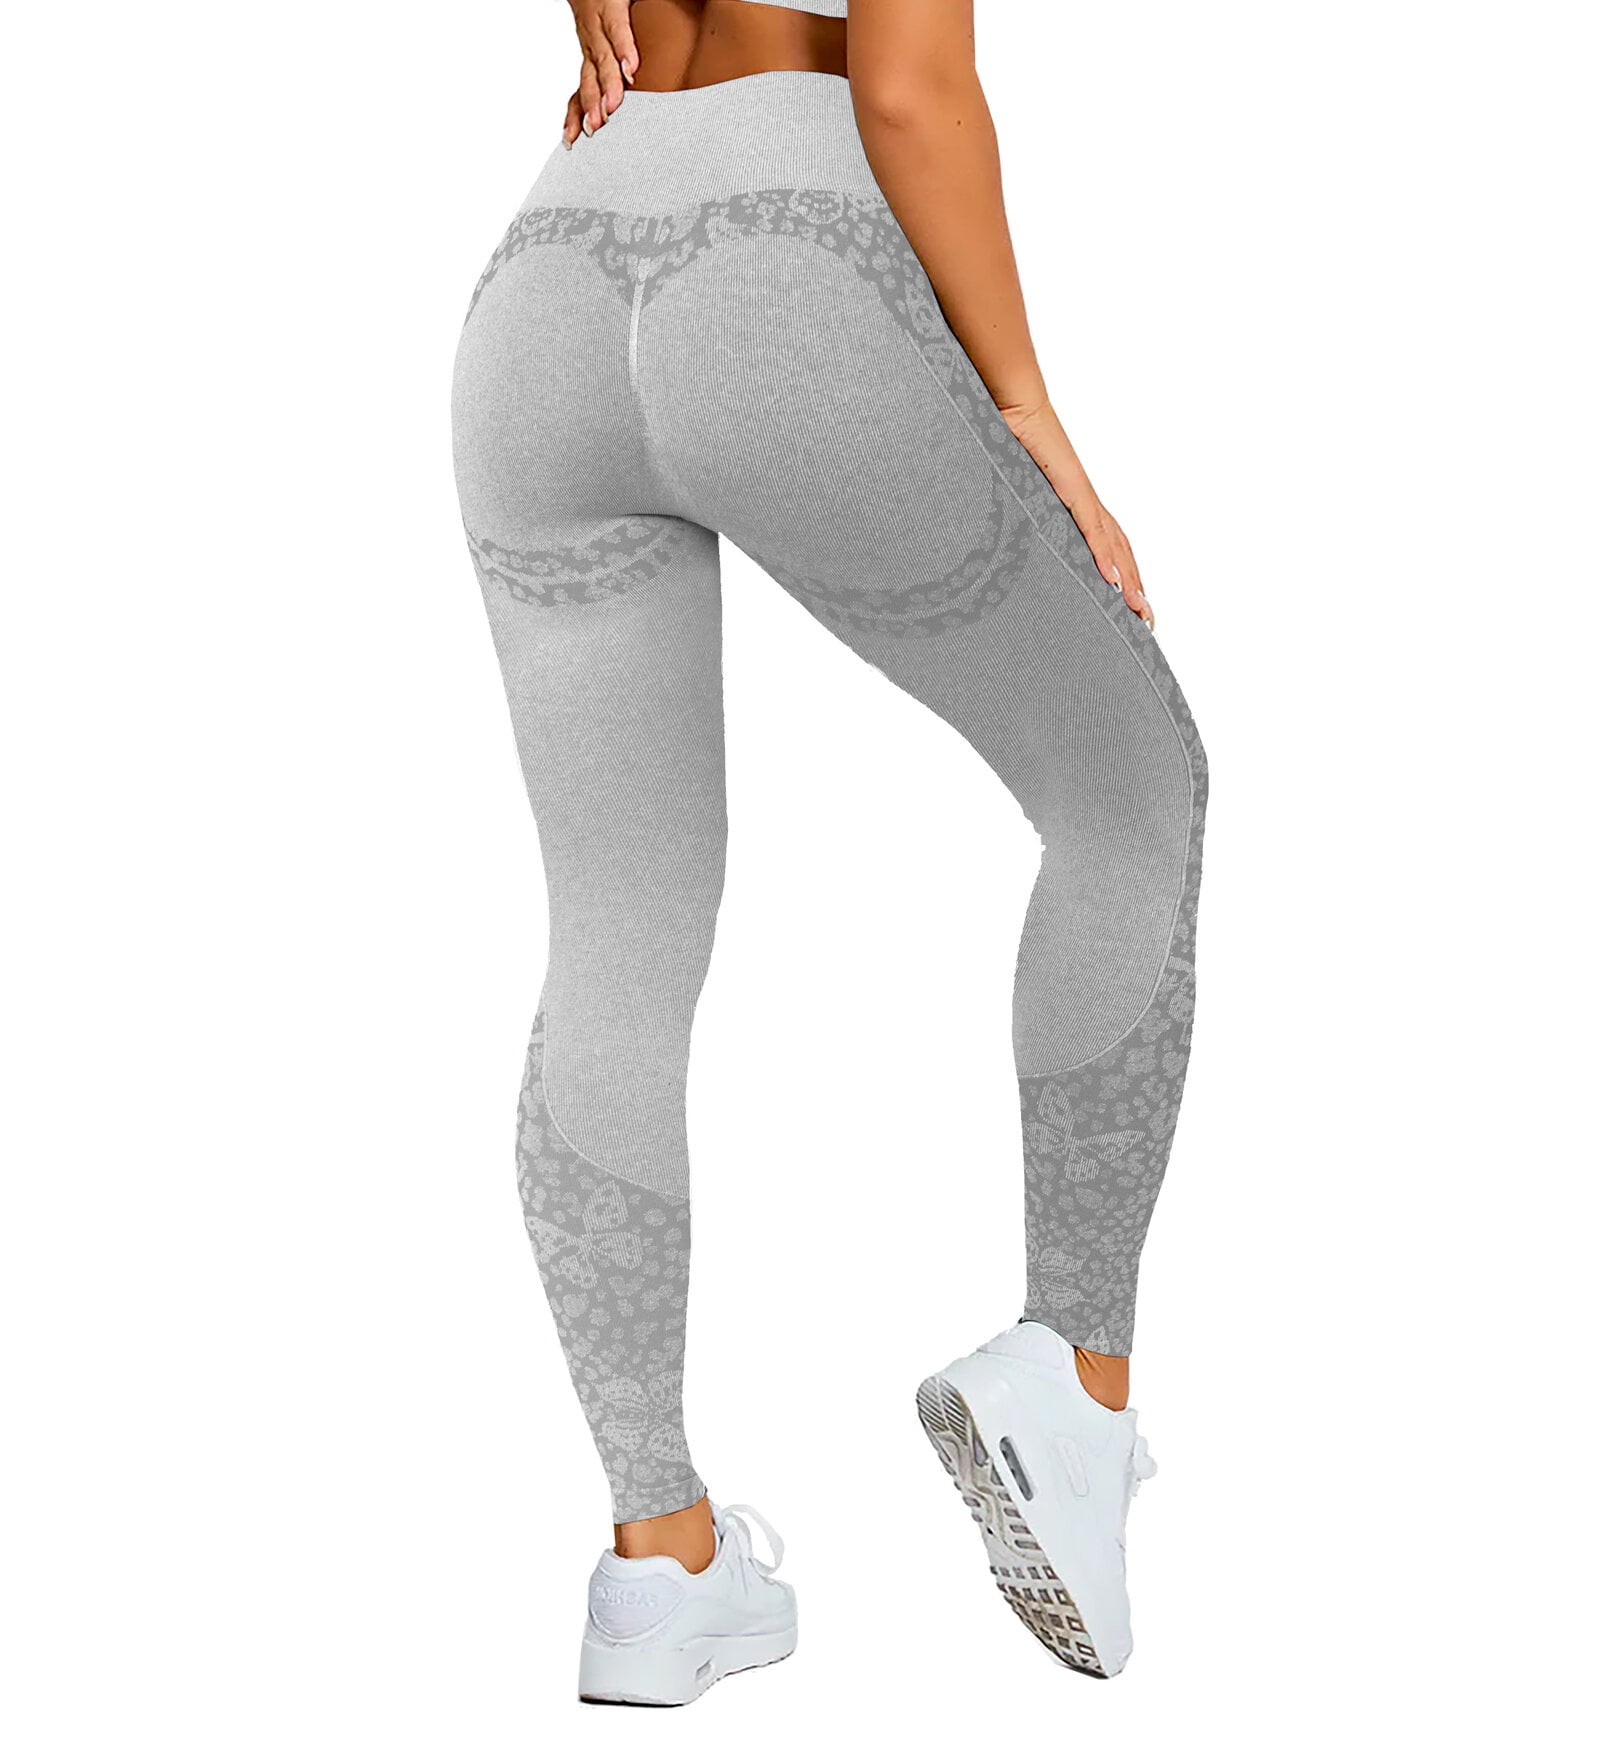 Womens Butt Lifting Seamless Butterfly Leggings for Gym Workout Yoga  Running by MAXXIM Grey Medium 